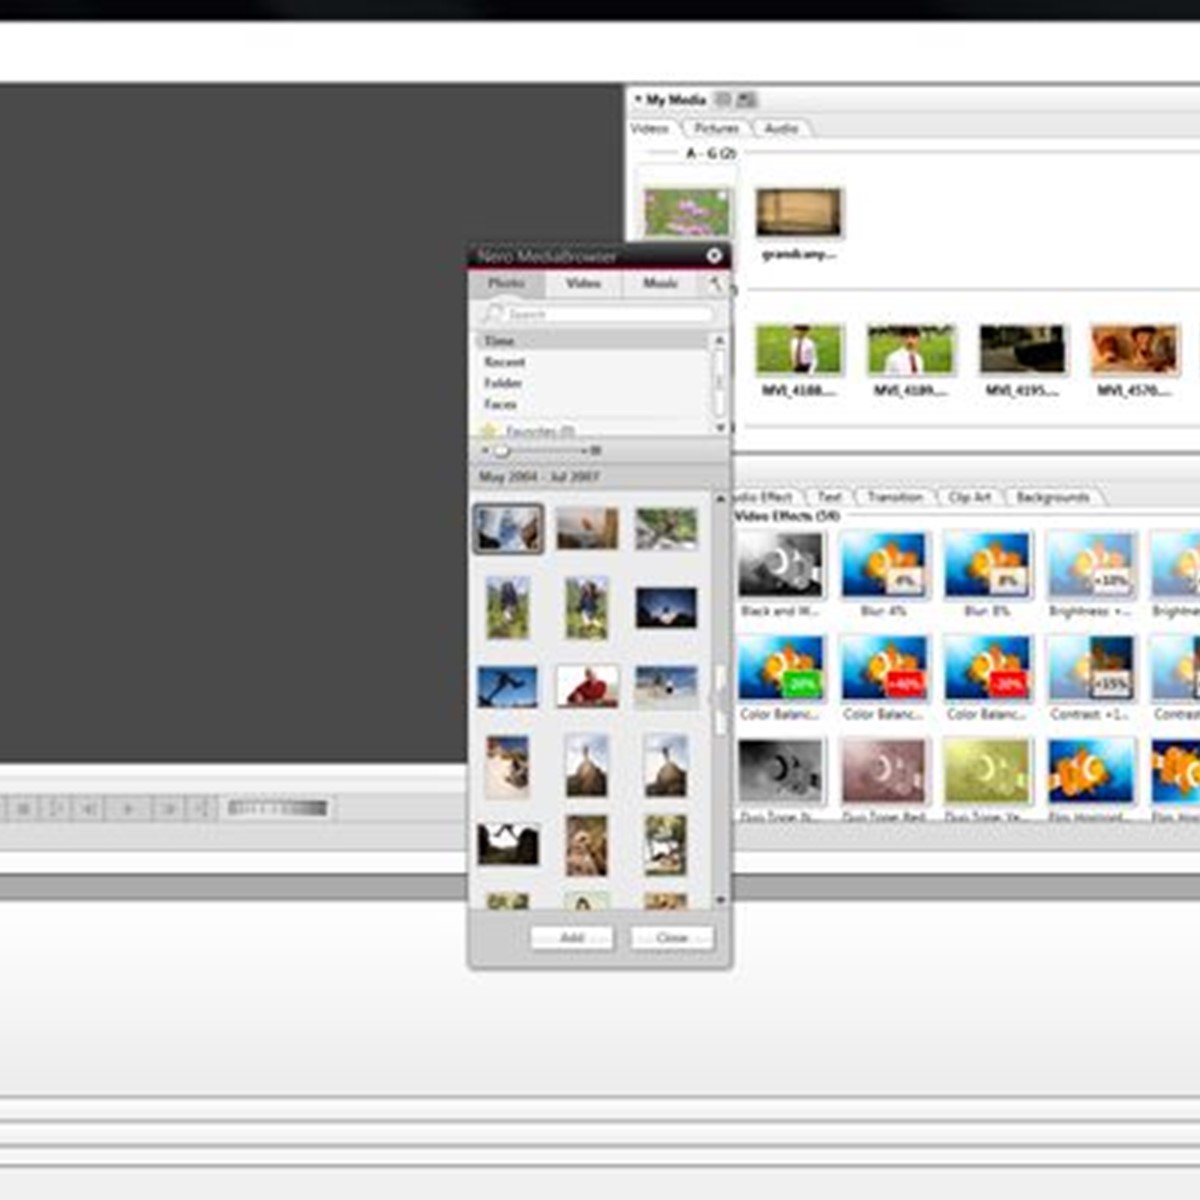 dvd authoring software for mac free download